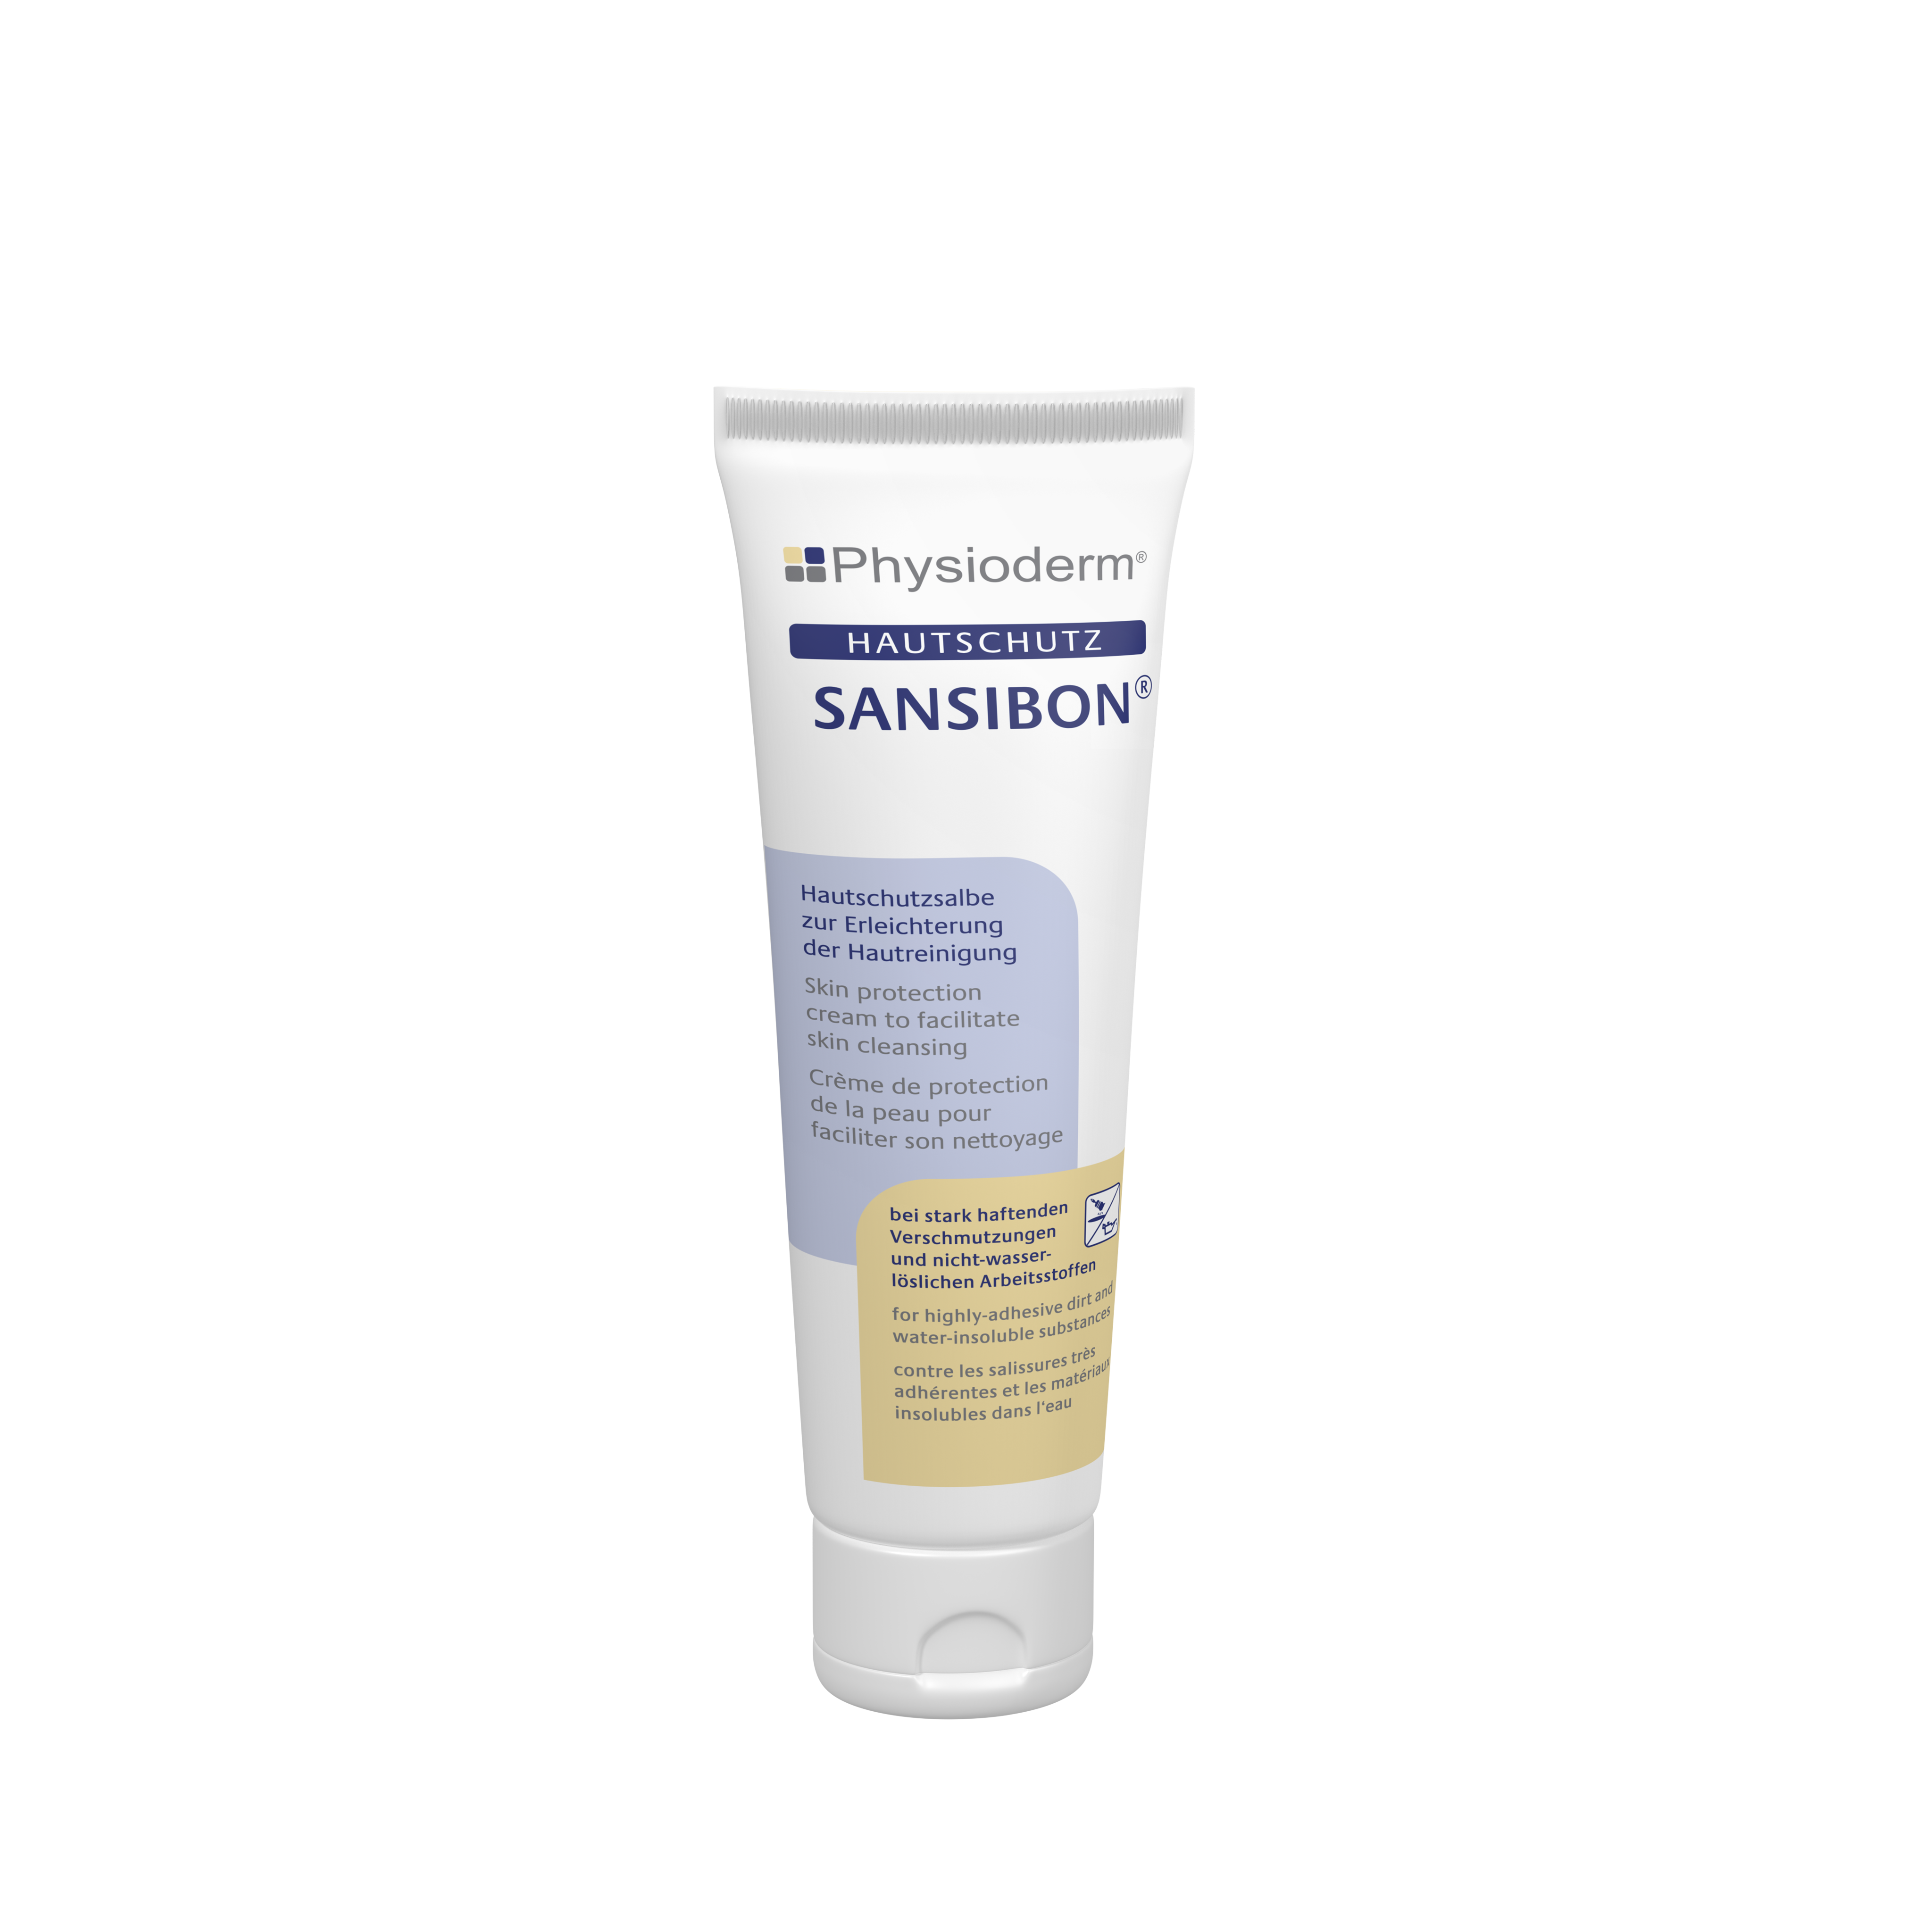  Phyioderm Sansibon 100ML (Heavy Dirt), Highly adhesive dirt, Skin protection